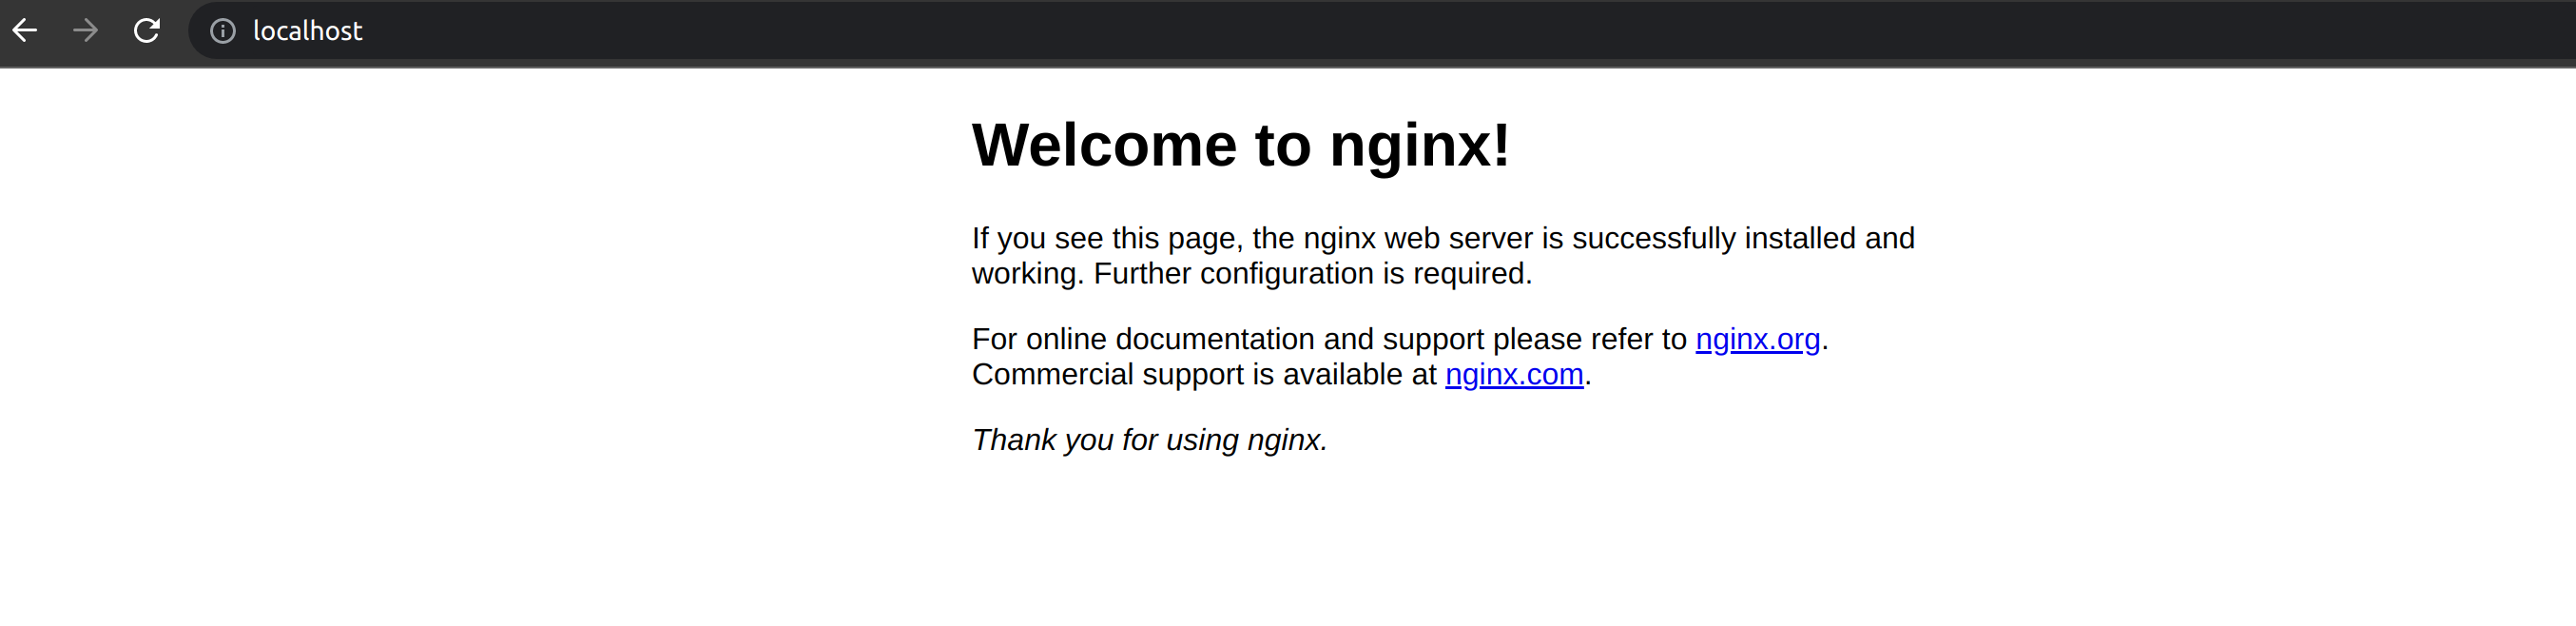 viewing-the-nginx-web-server.png